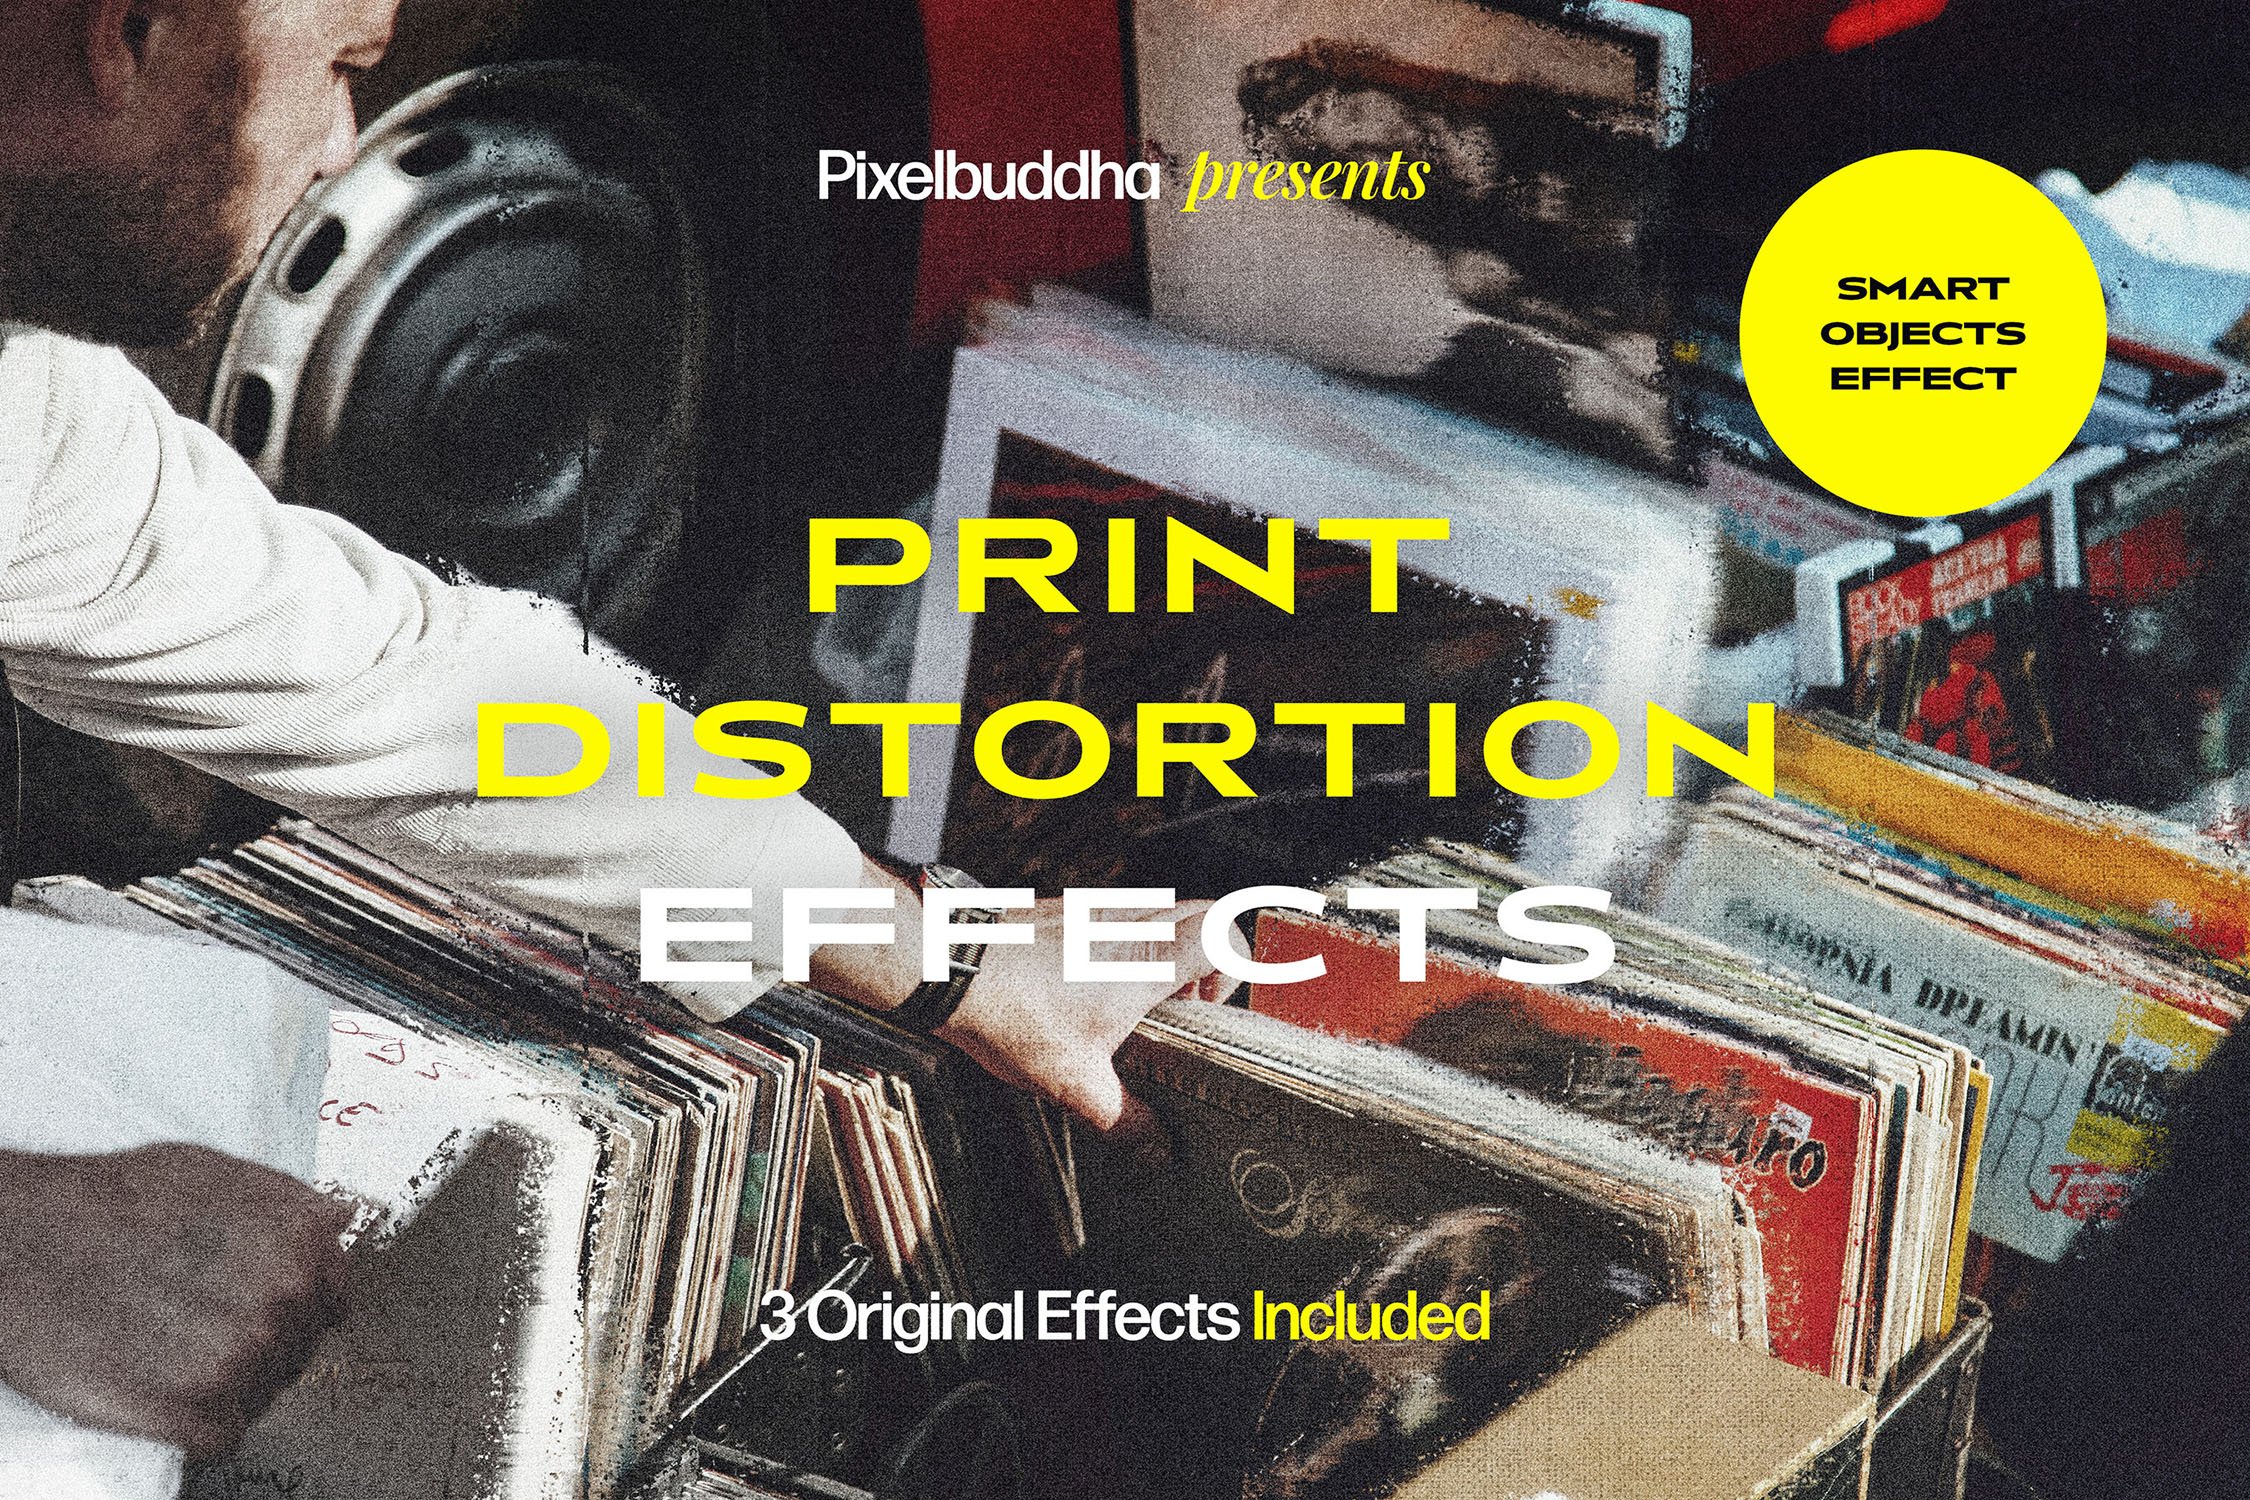 Print Distortion Effectscover image.